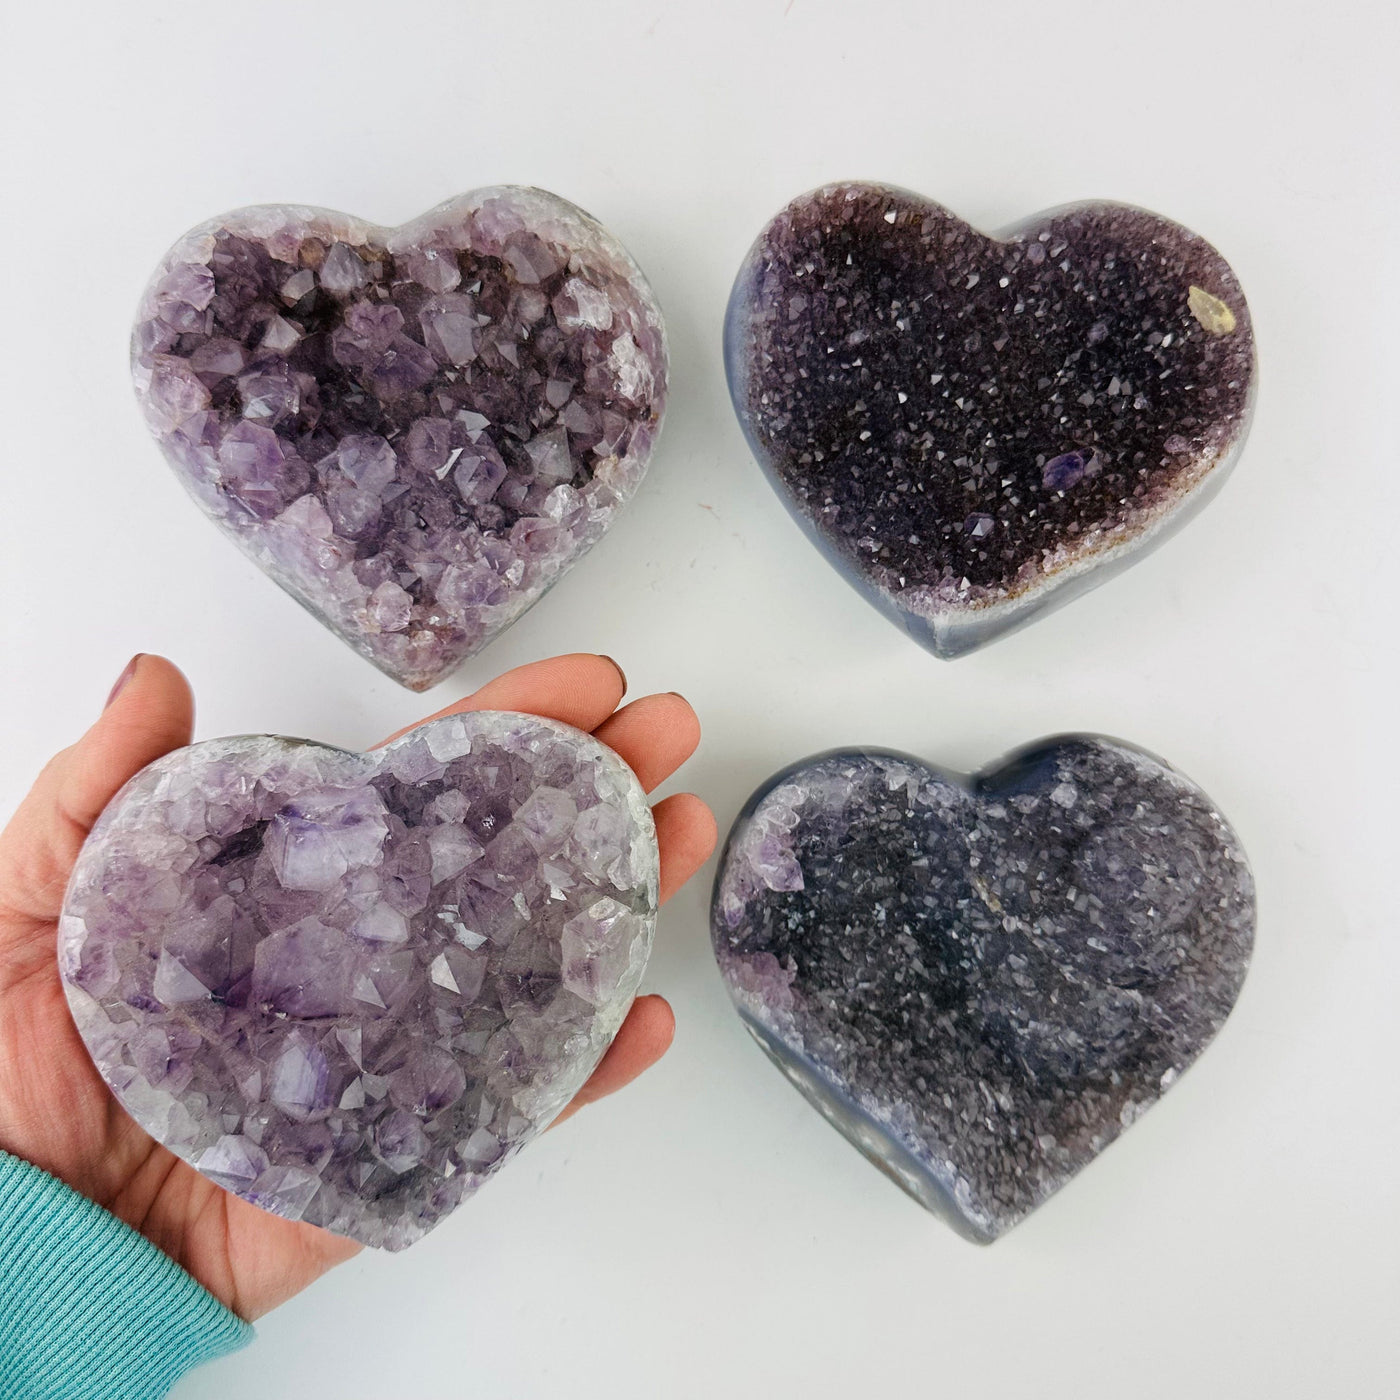 Amethyst Crystal Hearts with one in a hand for size reference